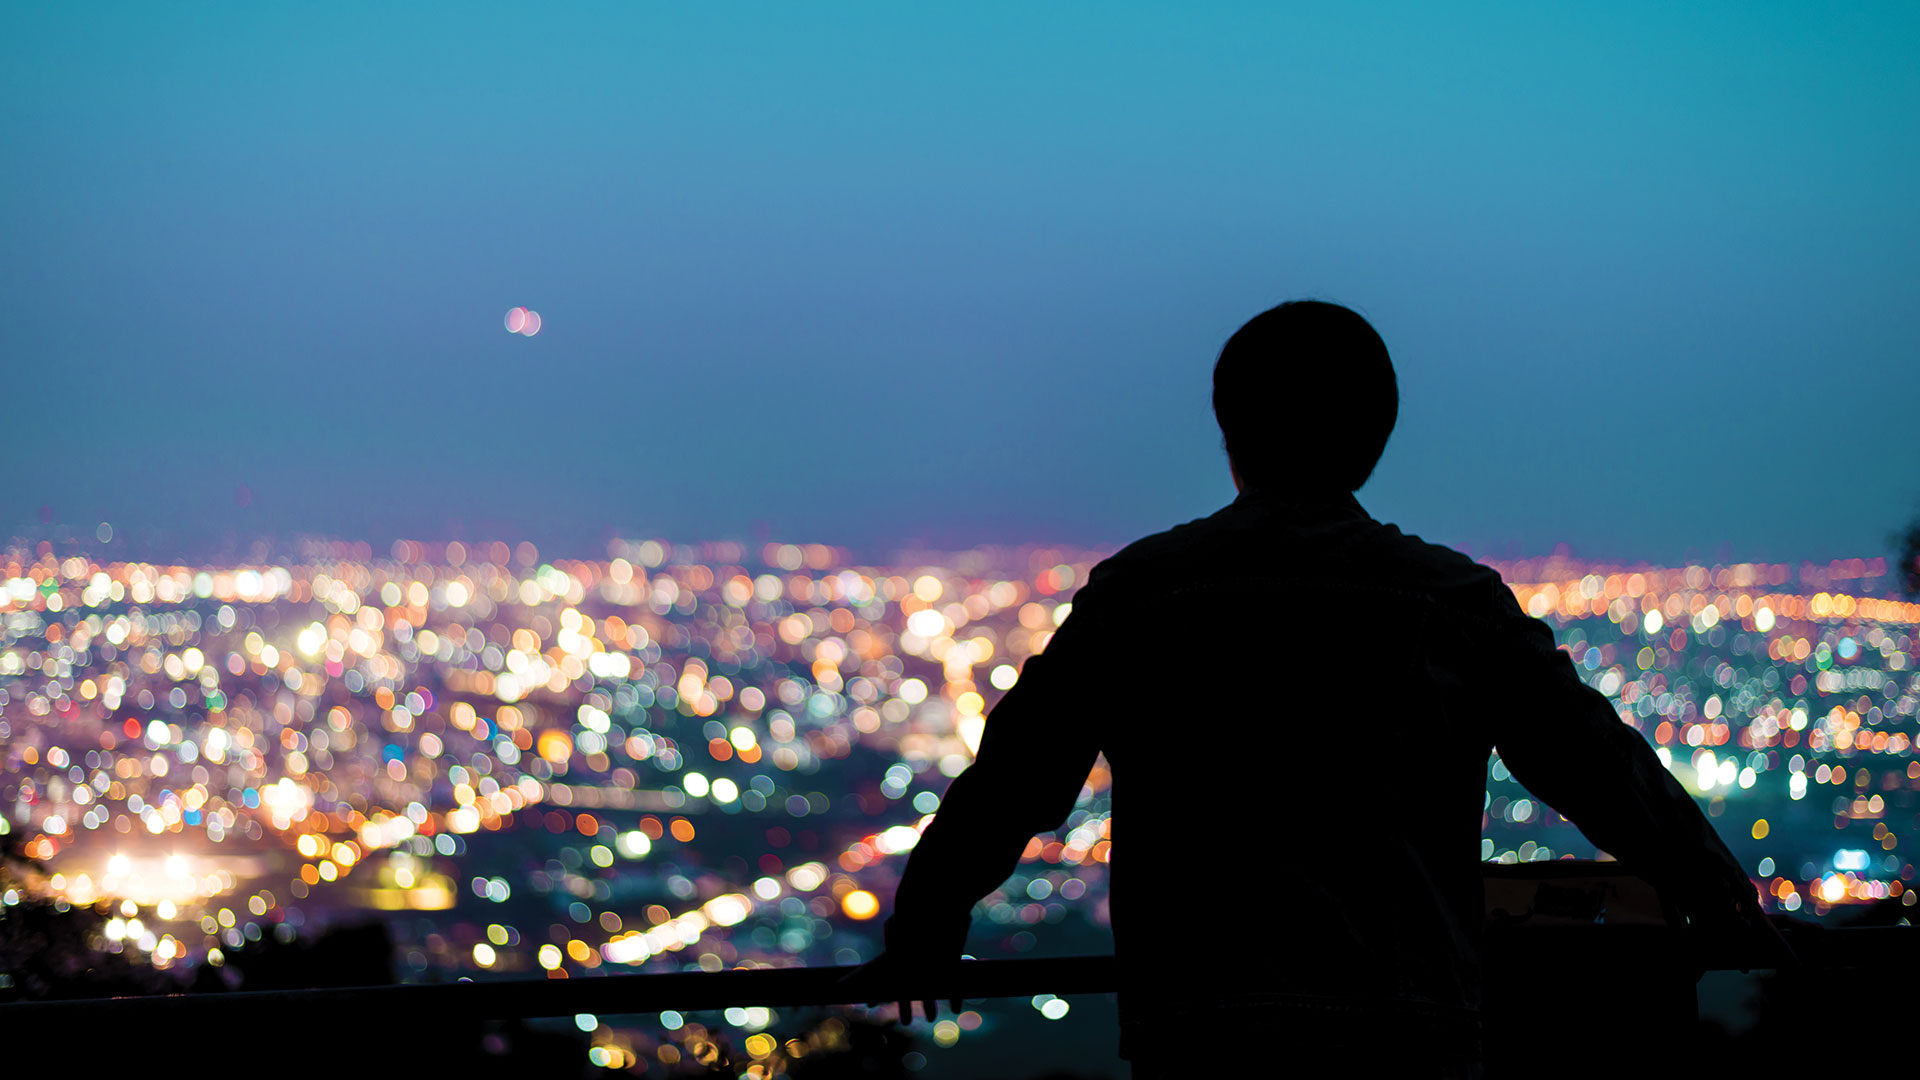 Silhouette of man looking above city at night